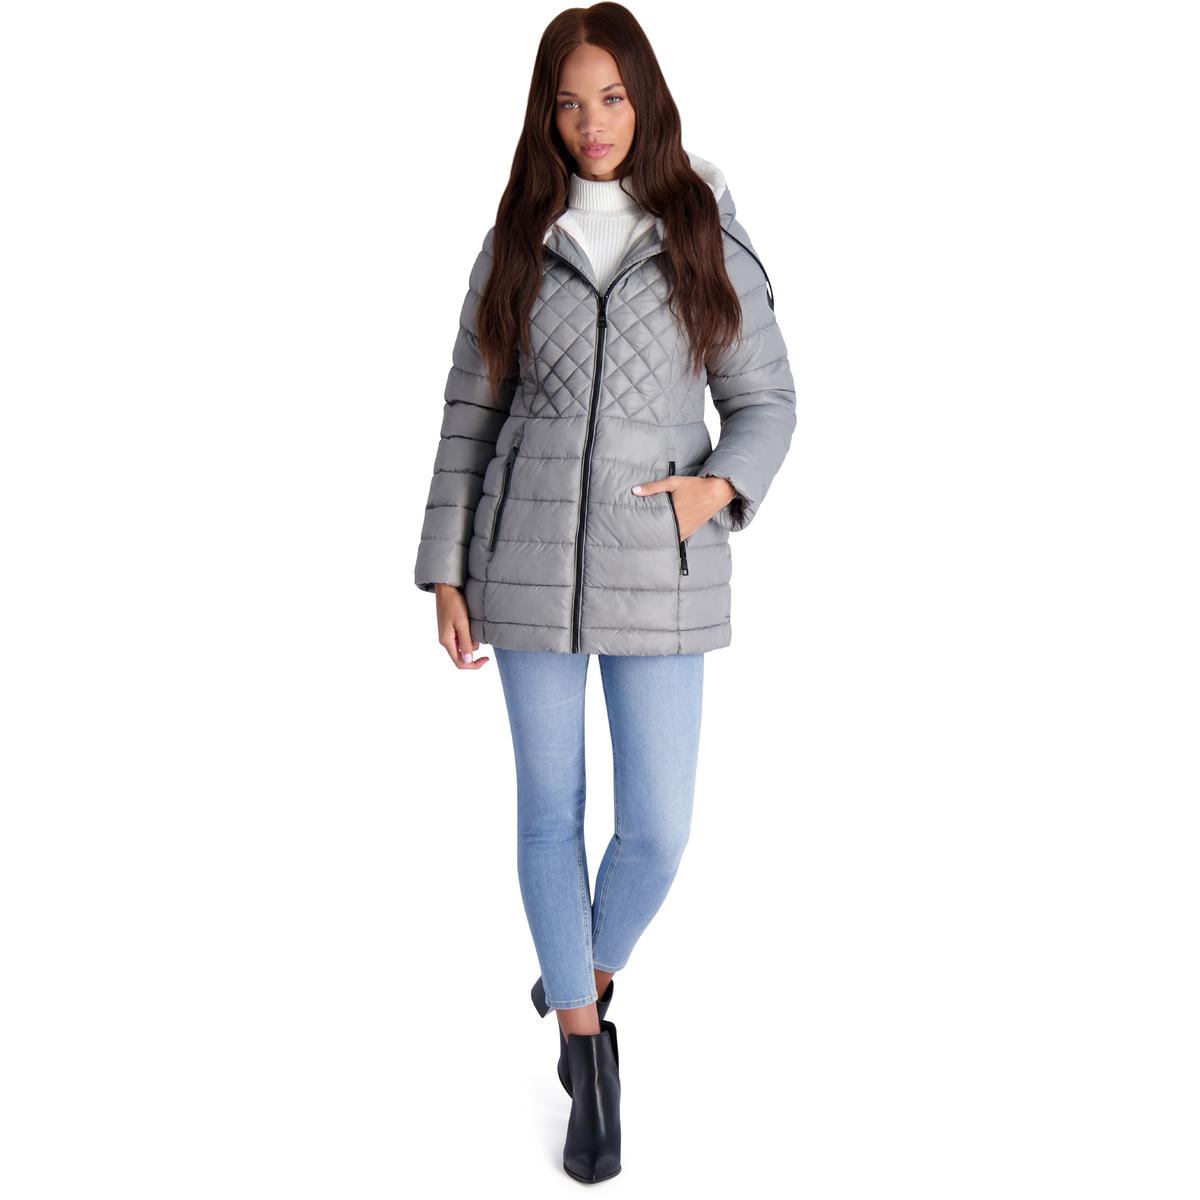 Steve Madden Cozy Lined Glacier Shield Womens Cozy Quilted Glacier